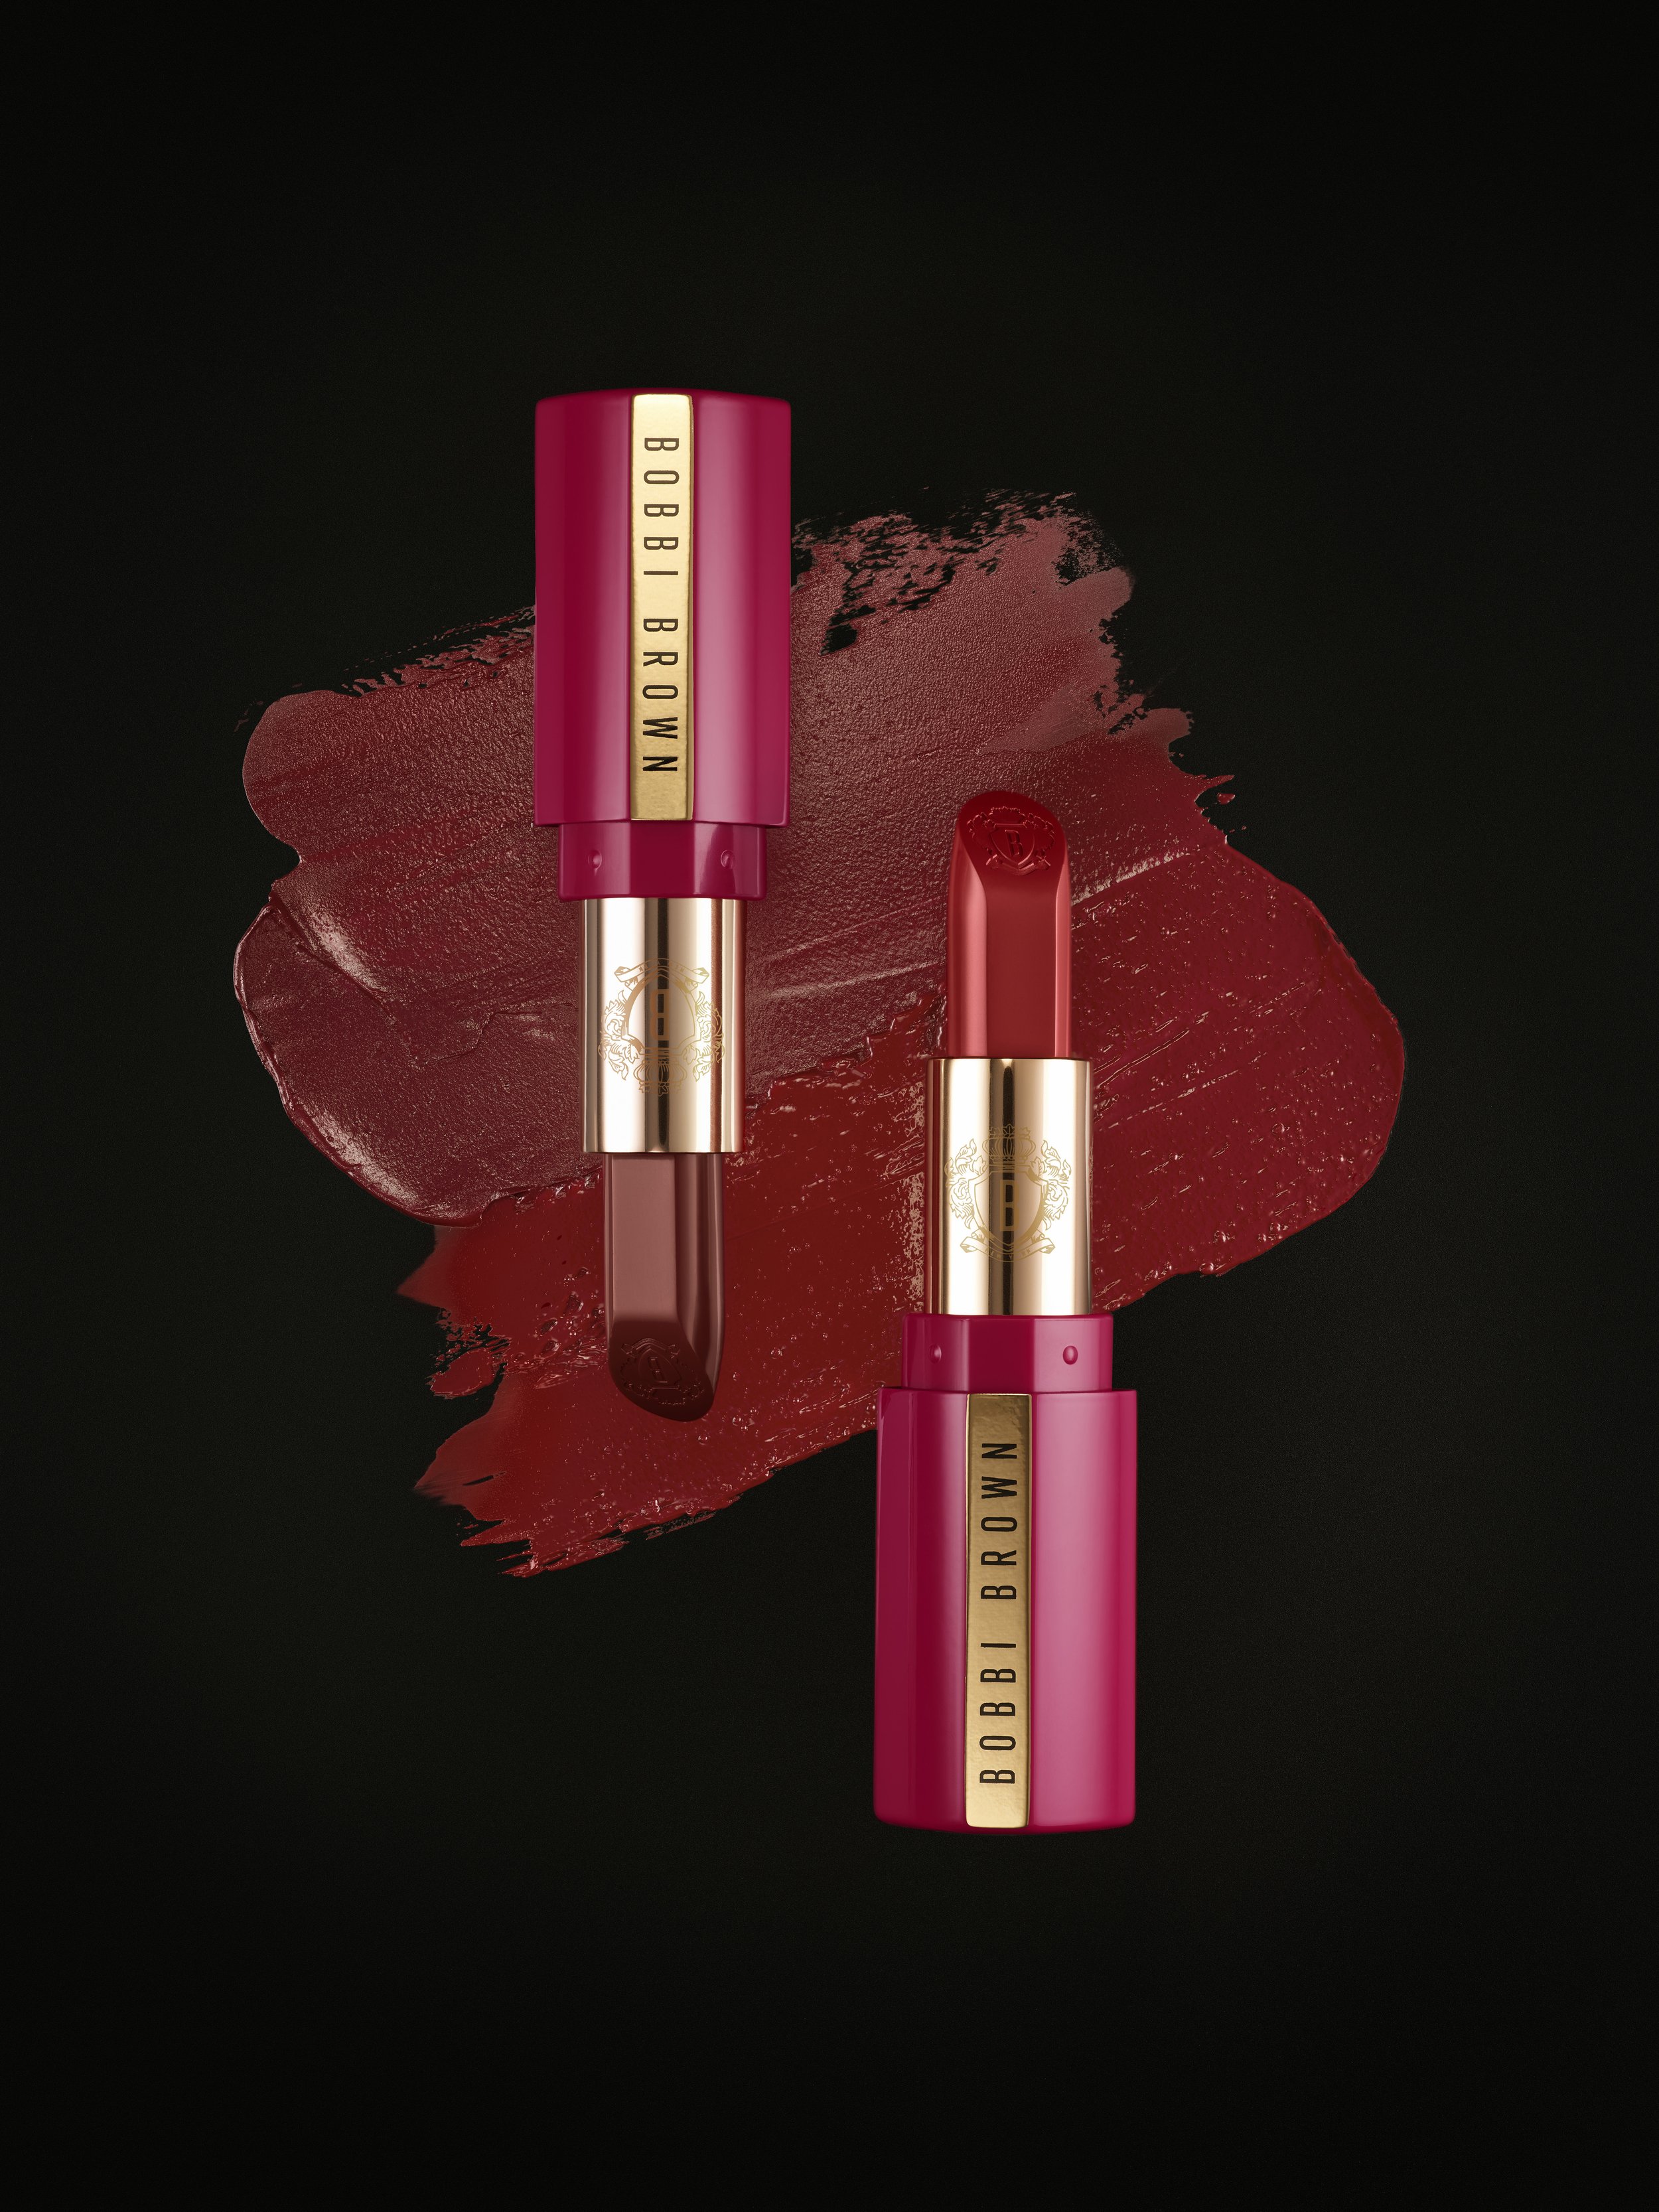 BobbiBrown_Struck by Luxe Lunar New Year Luxe Lip Color_PHP2050.jpg